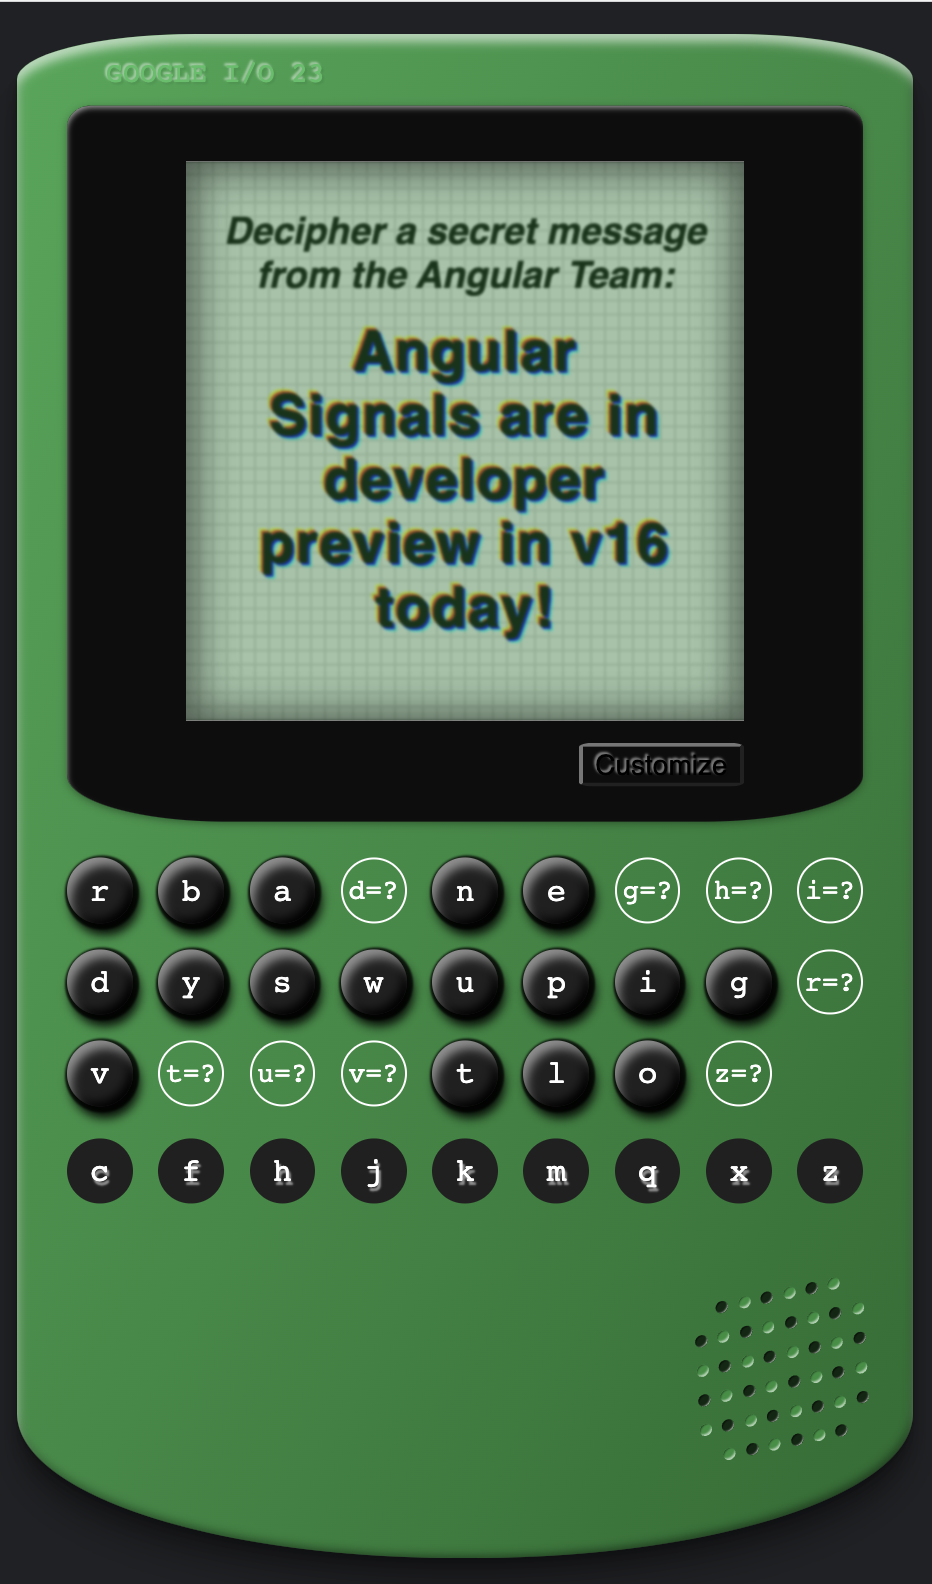 Angular Cypher game solved with a hidden message on the screen of 'Angular Signals are in developer preview in v16 today!'